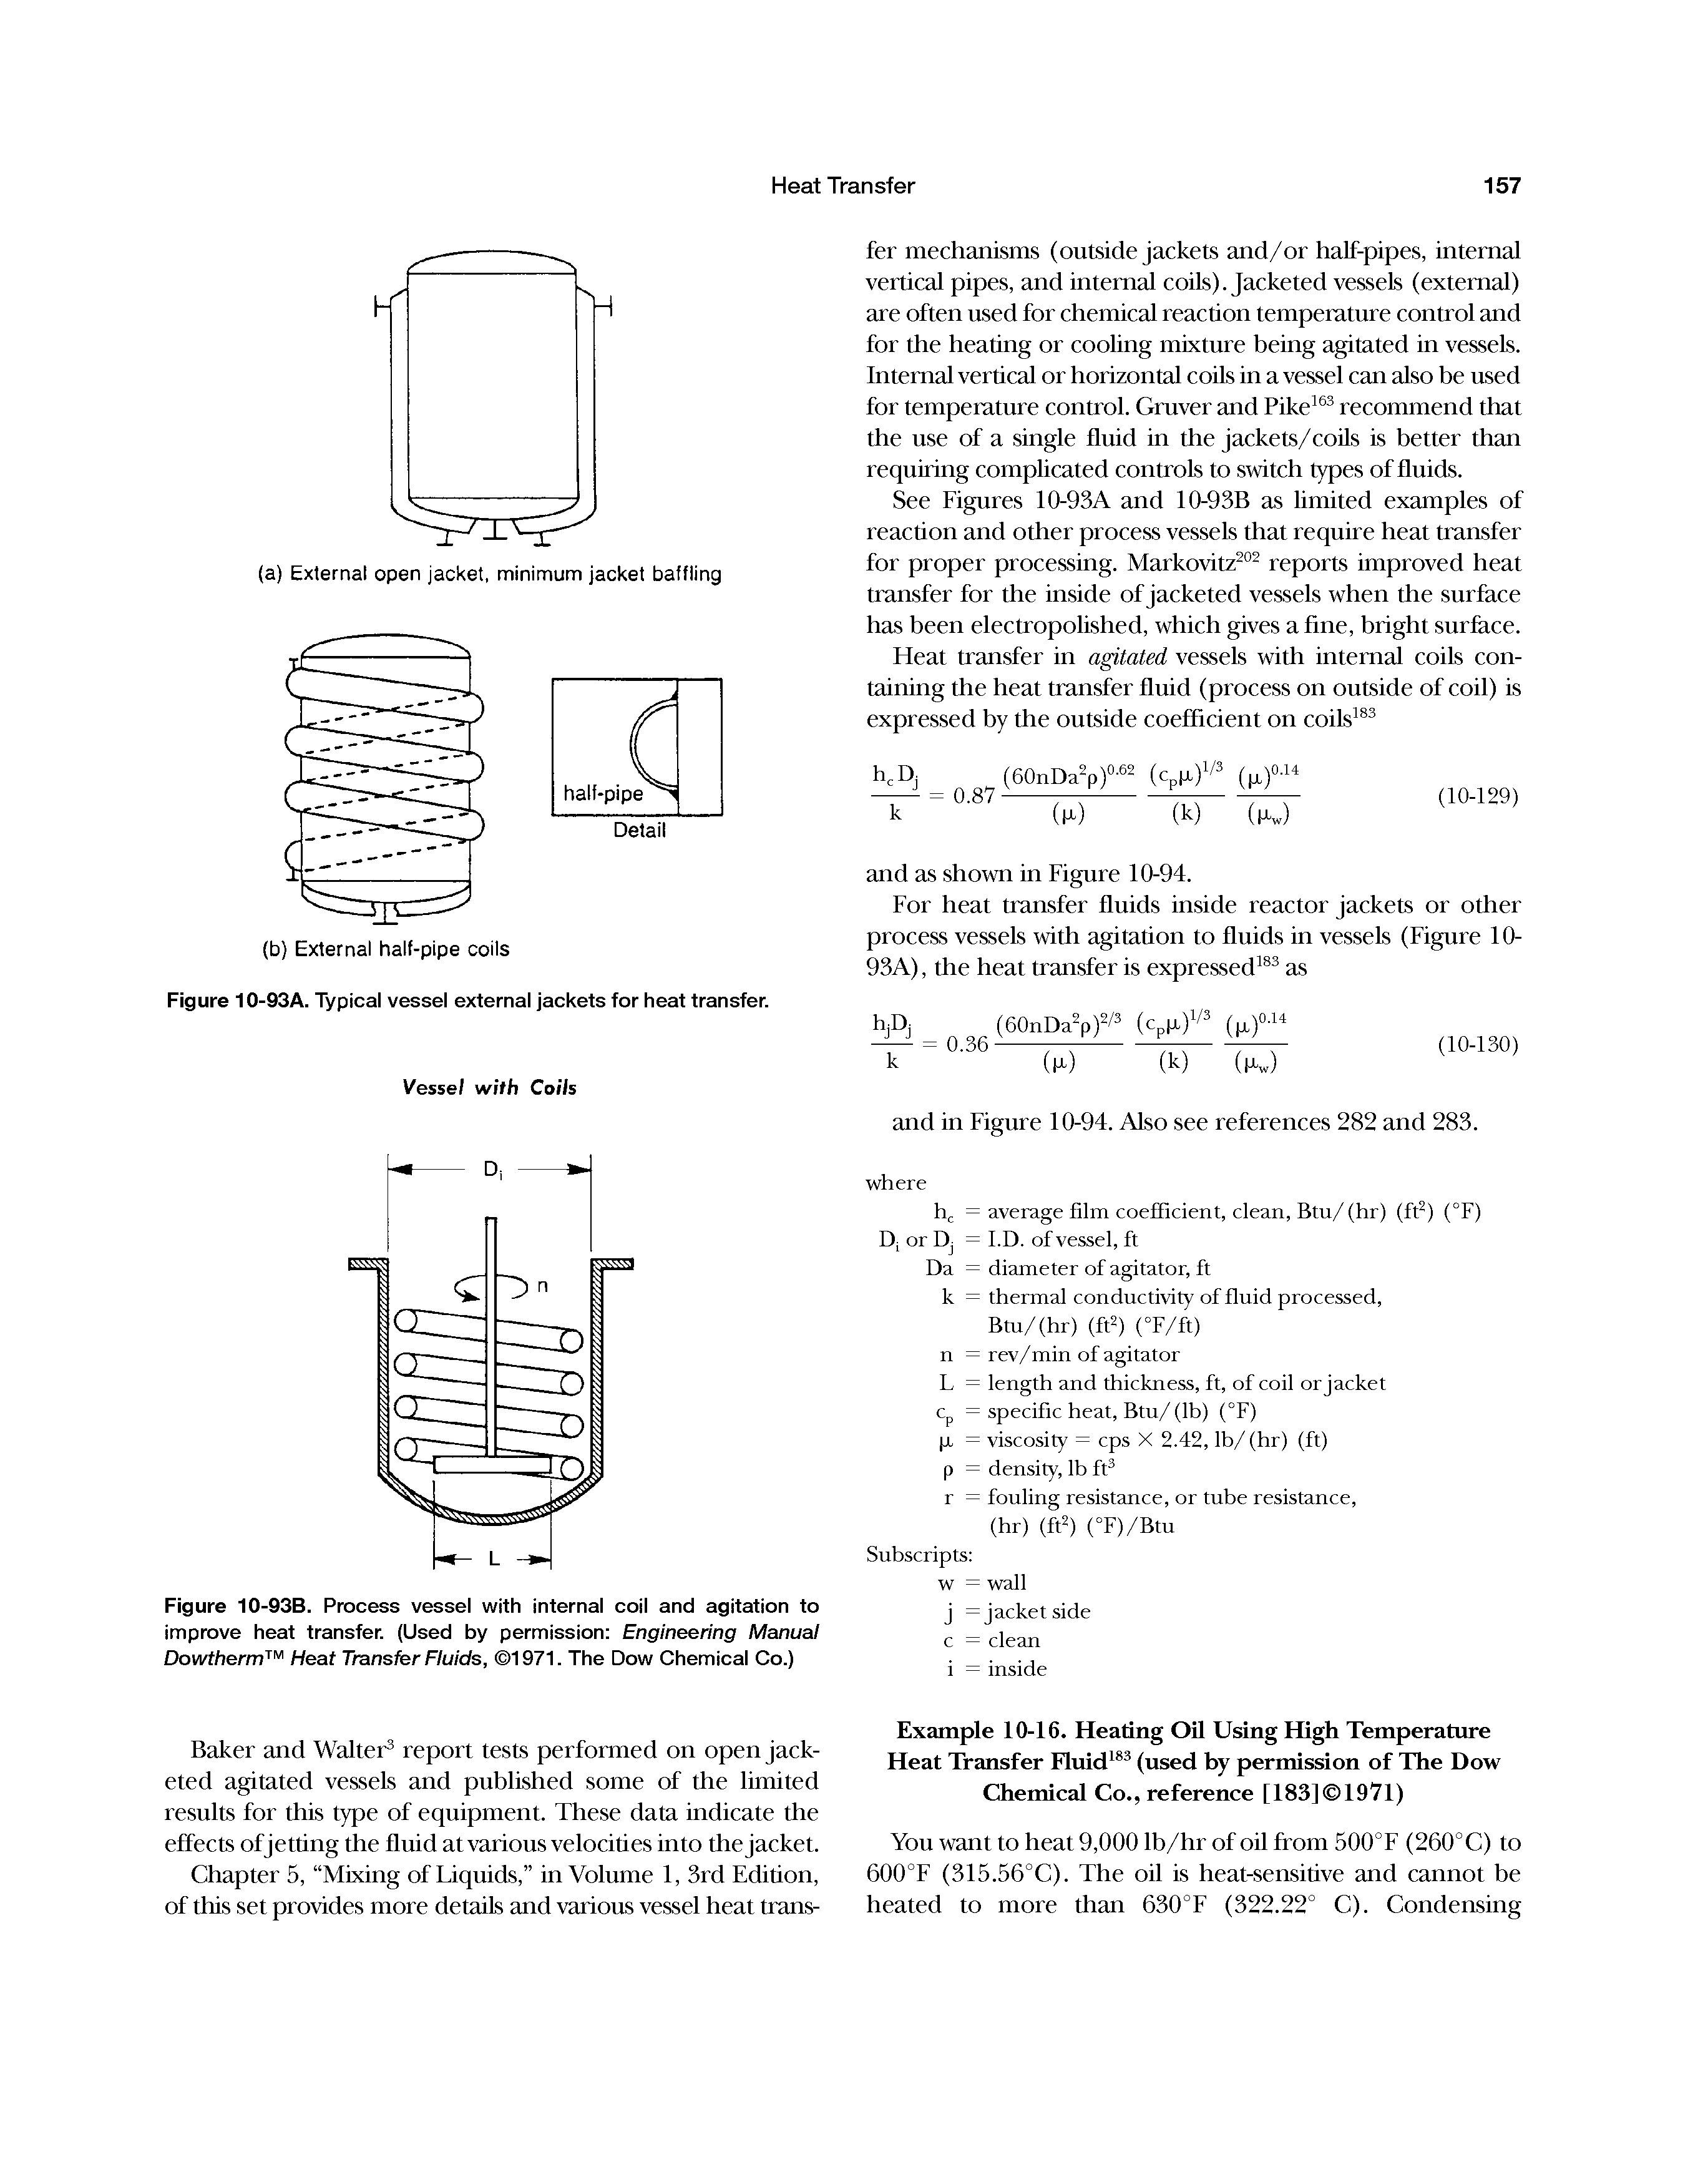 Figure 10-93B. Process vessel with internal coil and agitation to improve heat transfer. (Used by permission Engineering Manual Dowtherm Heat Transfer Fluids, 1971. The Dow Chemical Co.)...